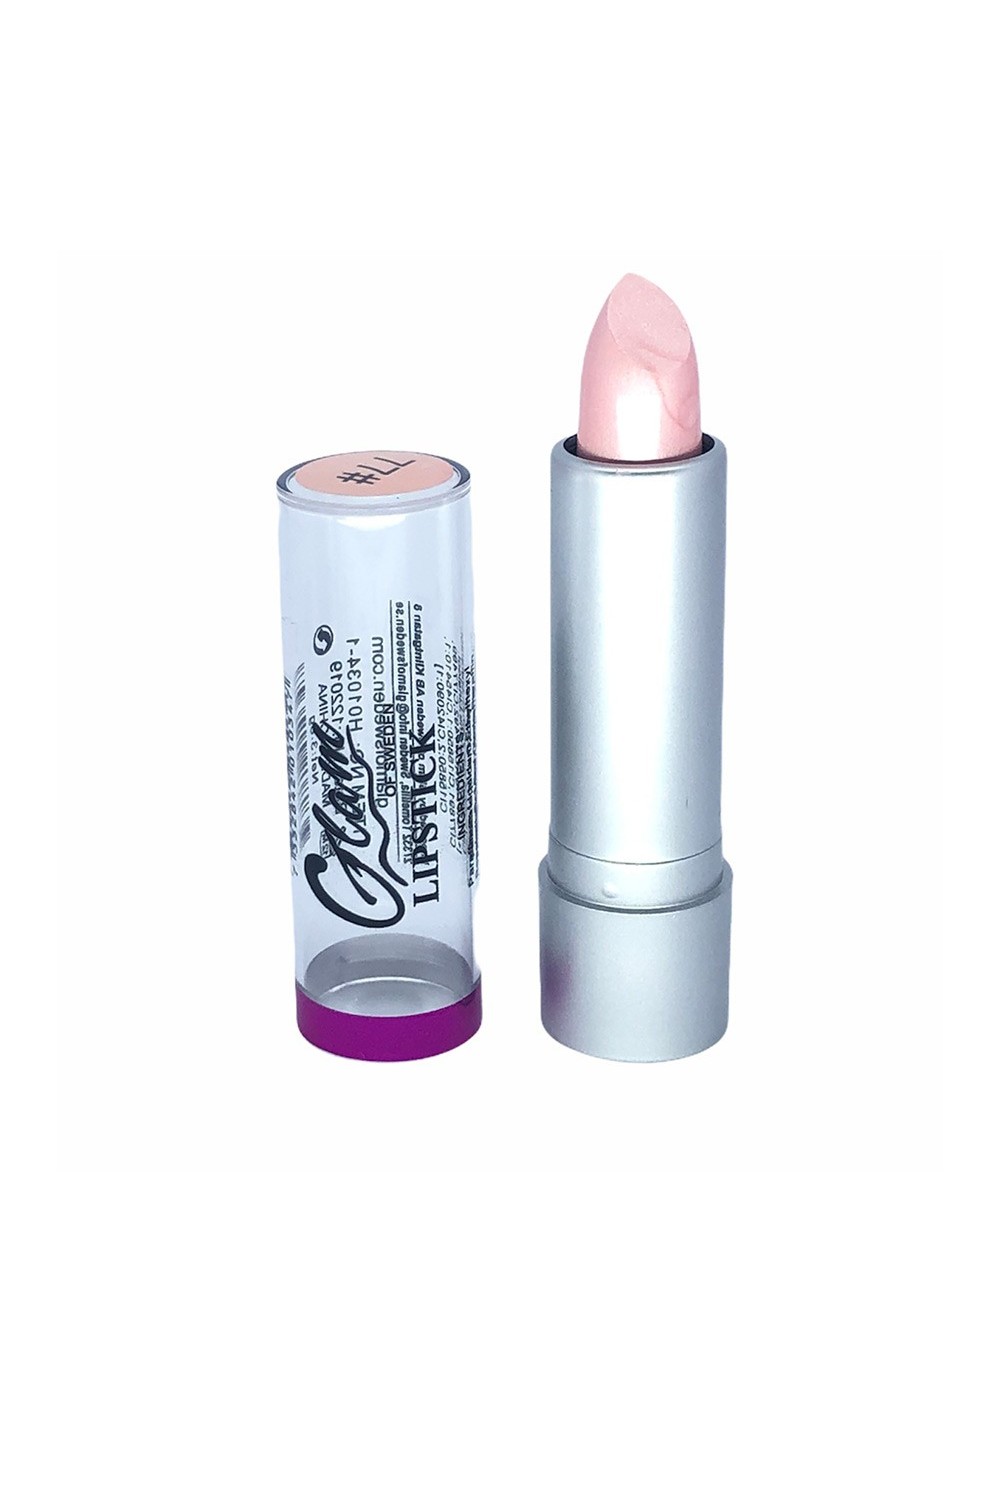 Glam Of Sweden Silver Lipstick 77-Chilly Pink 3,8g